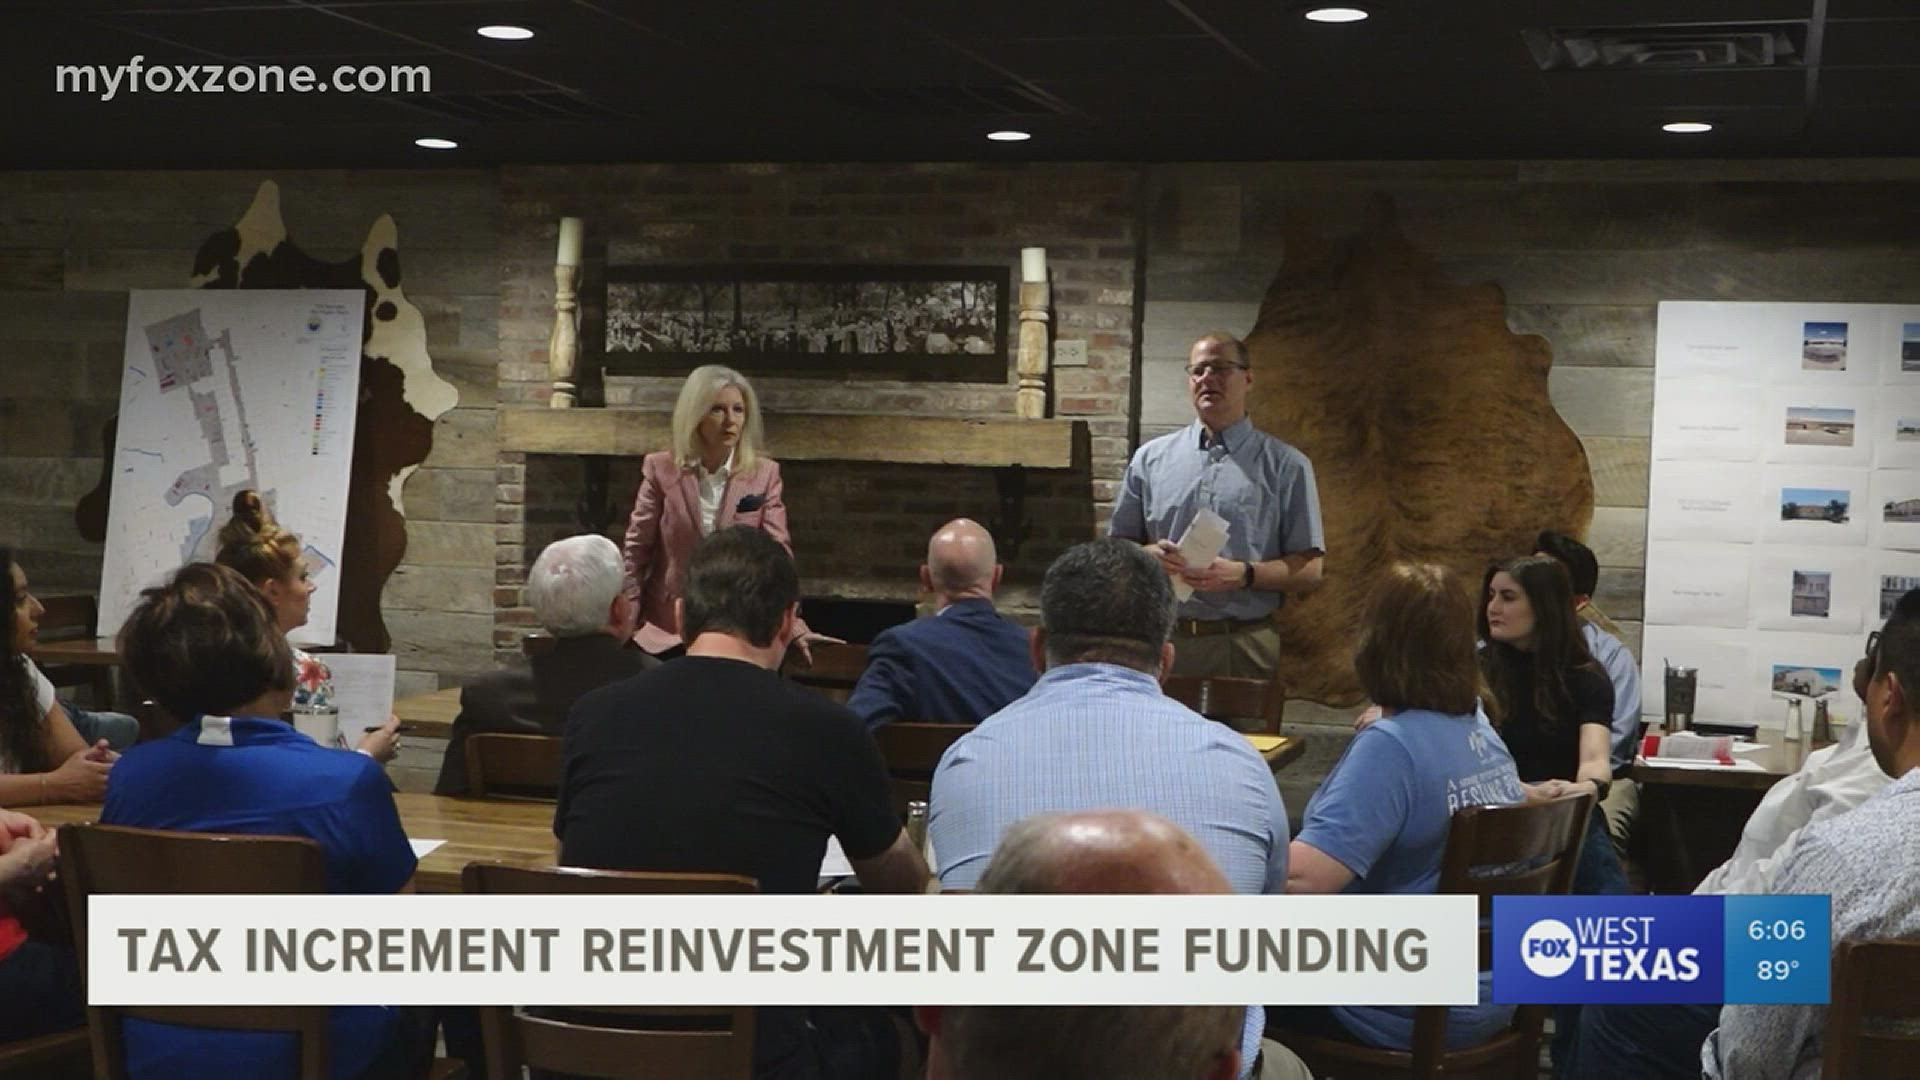 San Angelo business owners and residents took the time to attend Tuesday's meeting to learn more about the Tax Increment Reinvestment Zone fund.